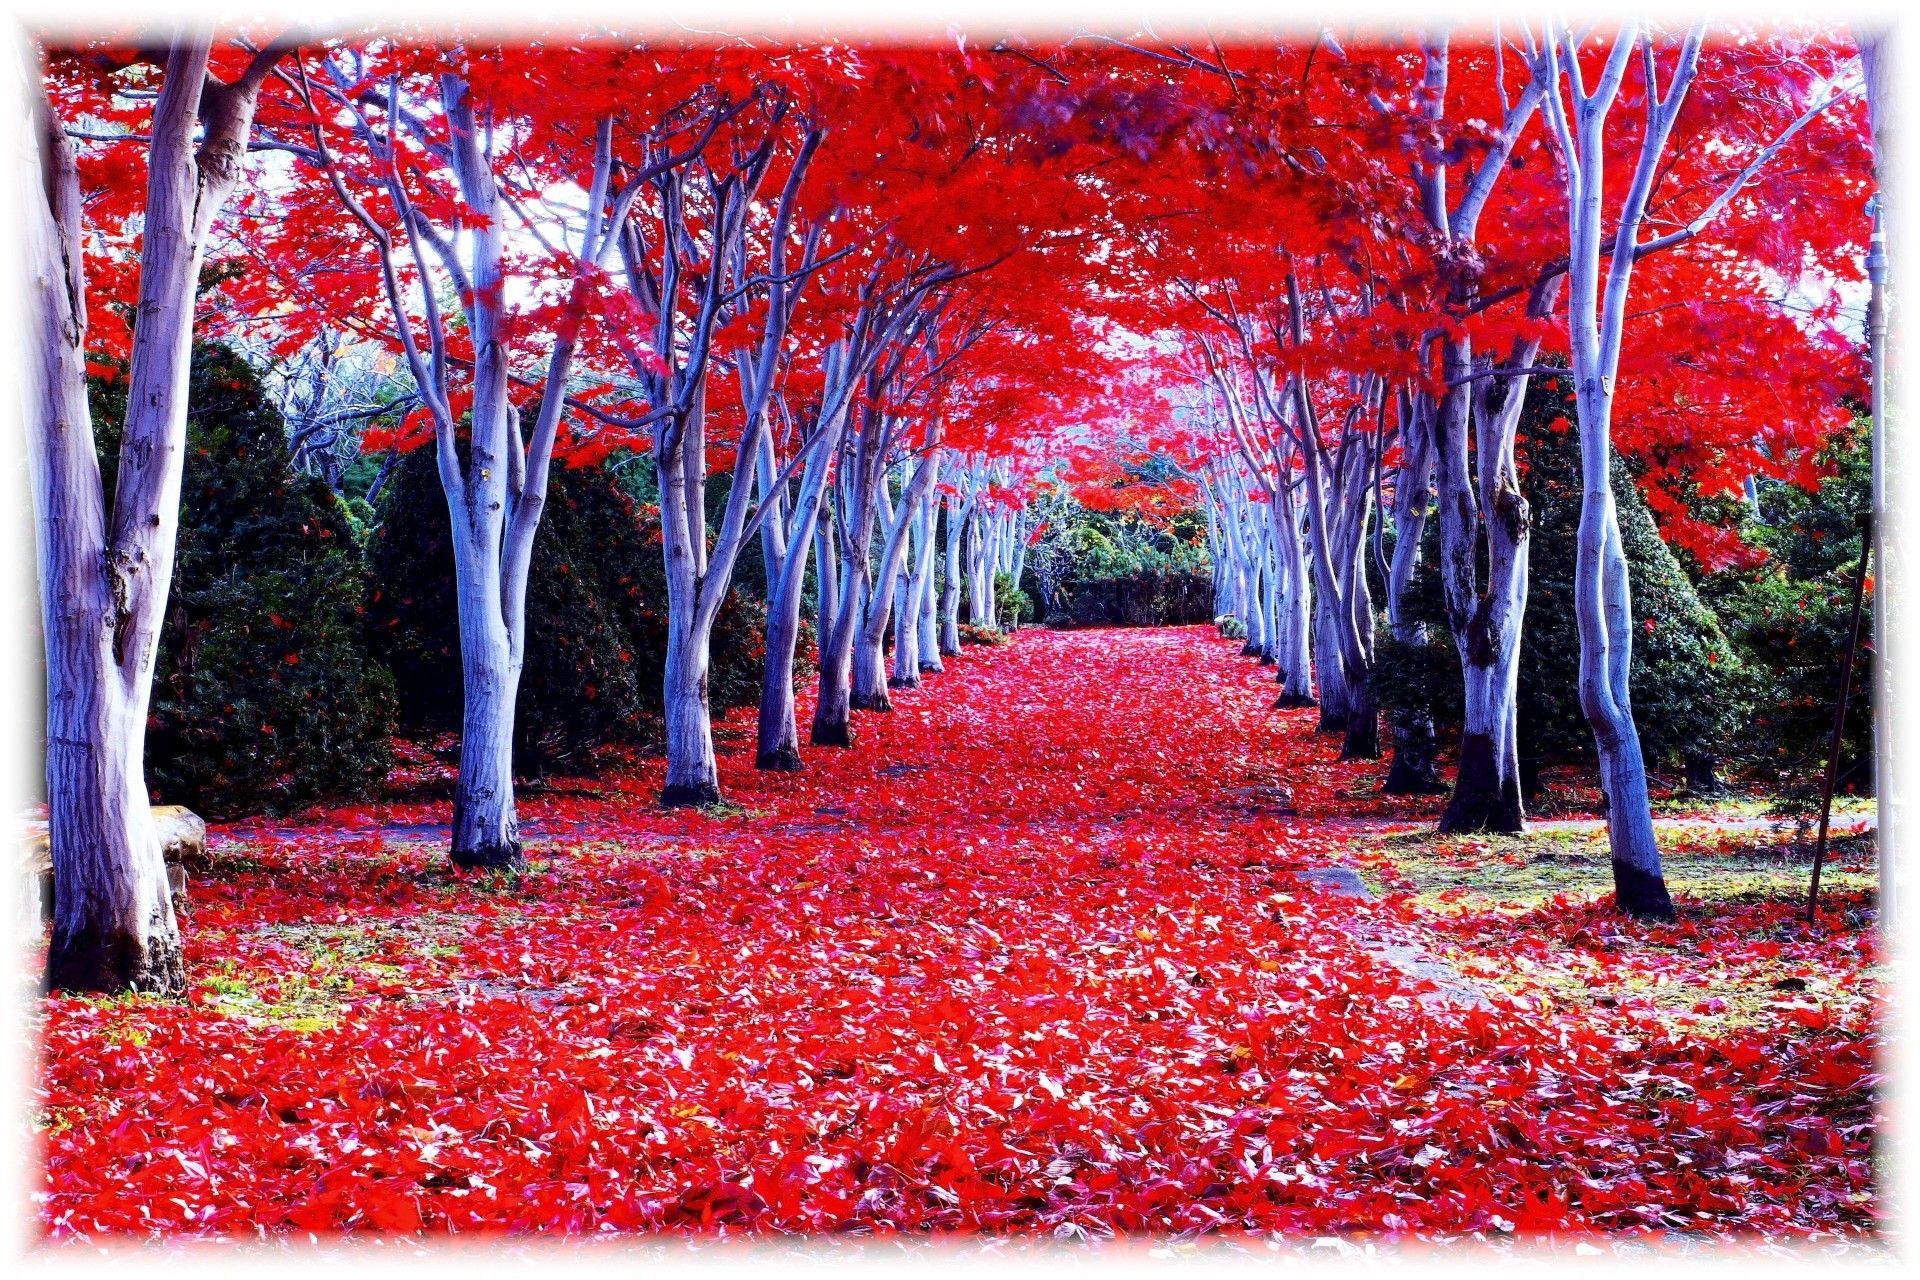 Red forest in a wonderful Autumn season - Beautiful Nature Landscapes Desktop Wallpaper. Awsome Landscape Wallpaper. Hokkaido, Japan travel, Japan travel guide